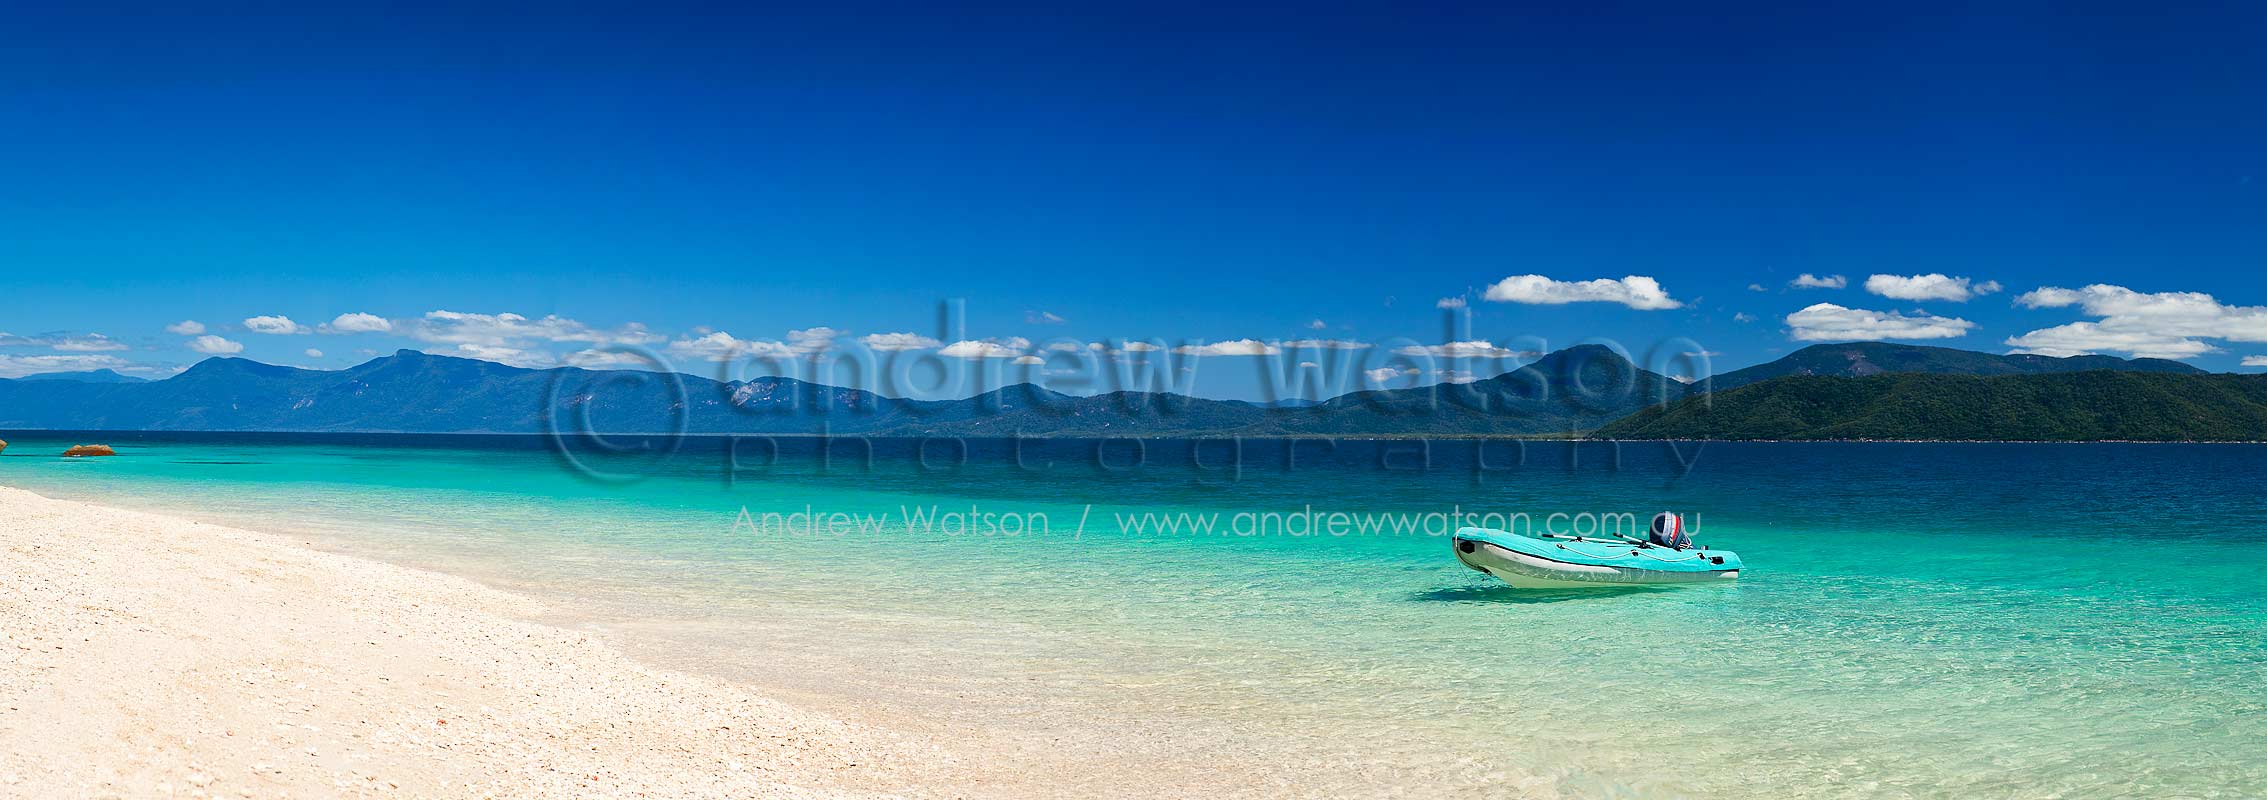 North Queensland Panoramic - Image of Nudey Beach, Fitzroy 